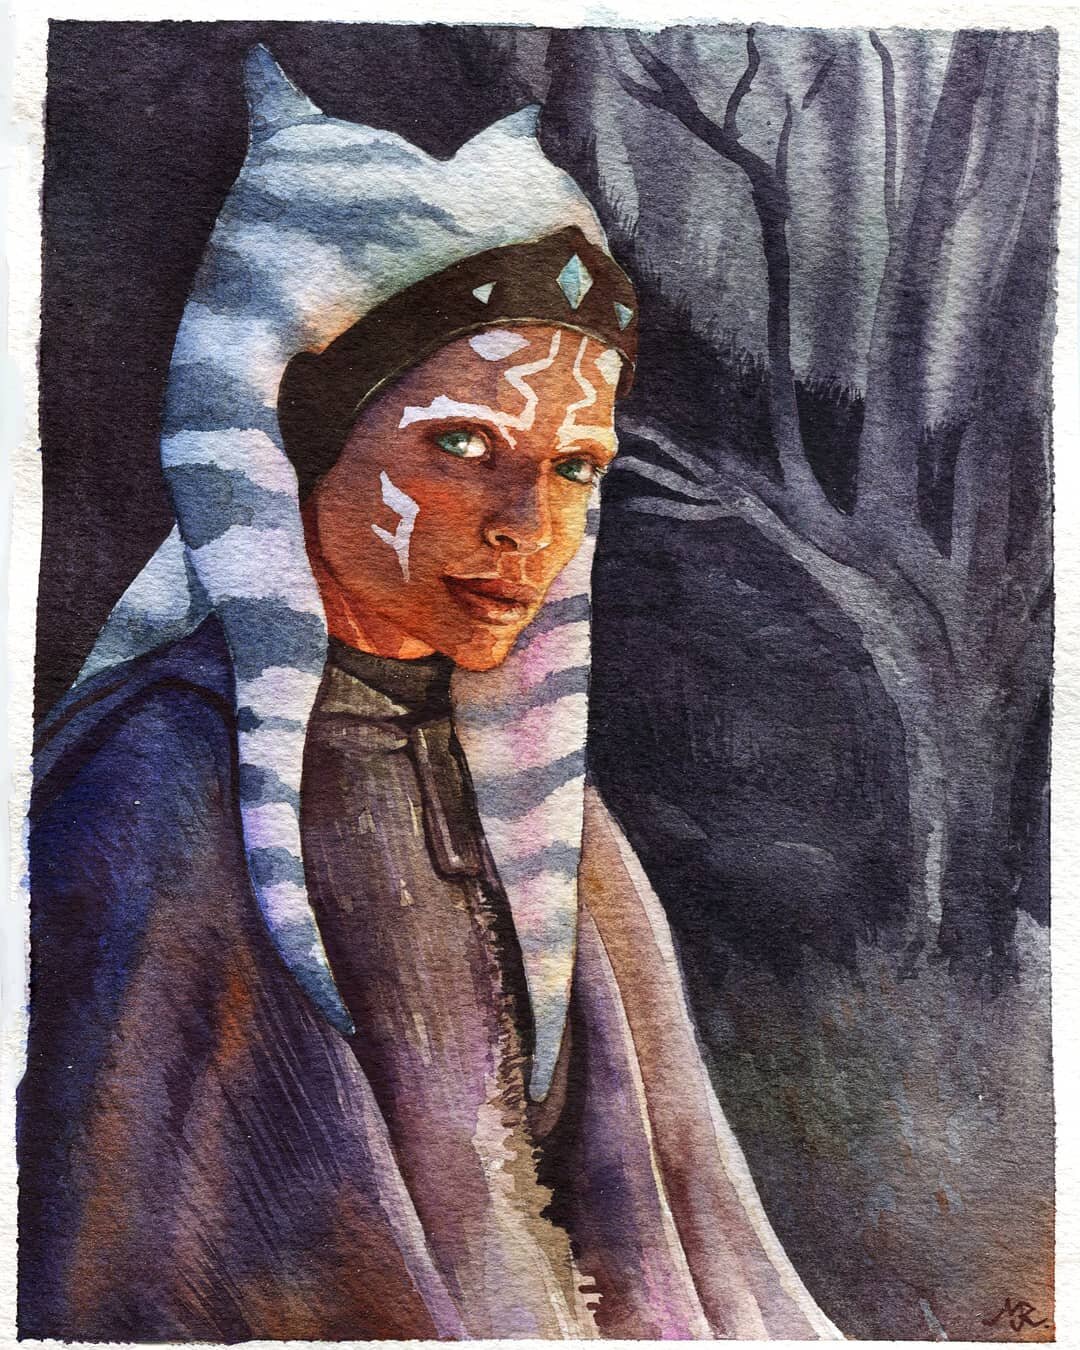 Ahsoka art!

This was one of the darkest scenes I've ever painted with watercolor, it was a fun challenge! I exhausted nearly an entire half-pan of moon glow on the background 😅

I really hope we see more of her, perhaps a meeting with LUKE?!?! In t